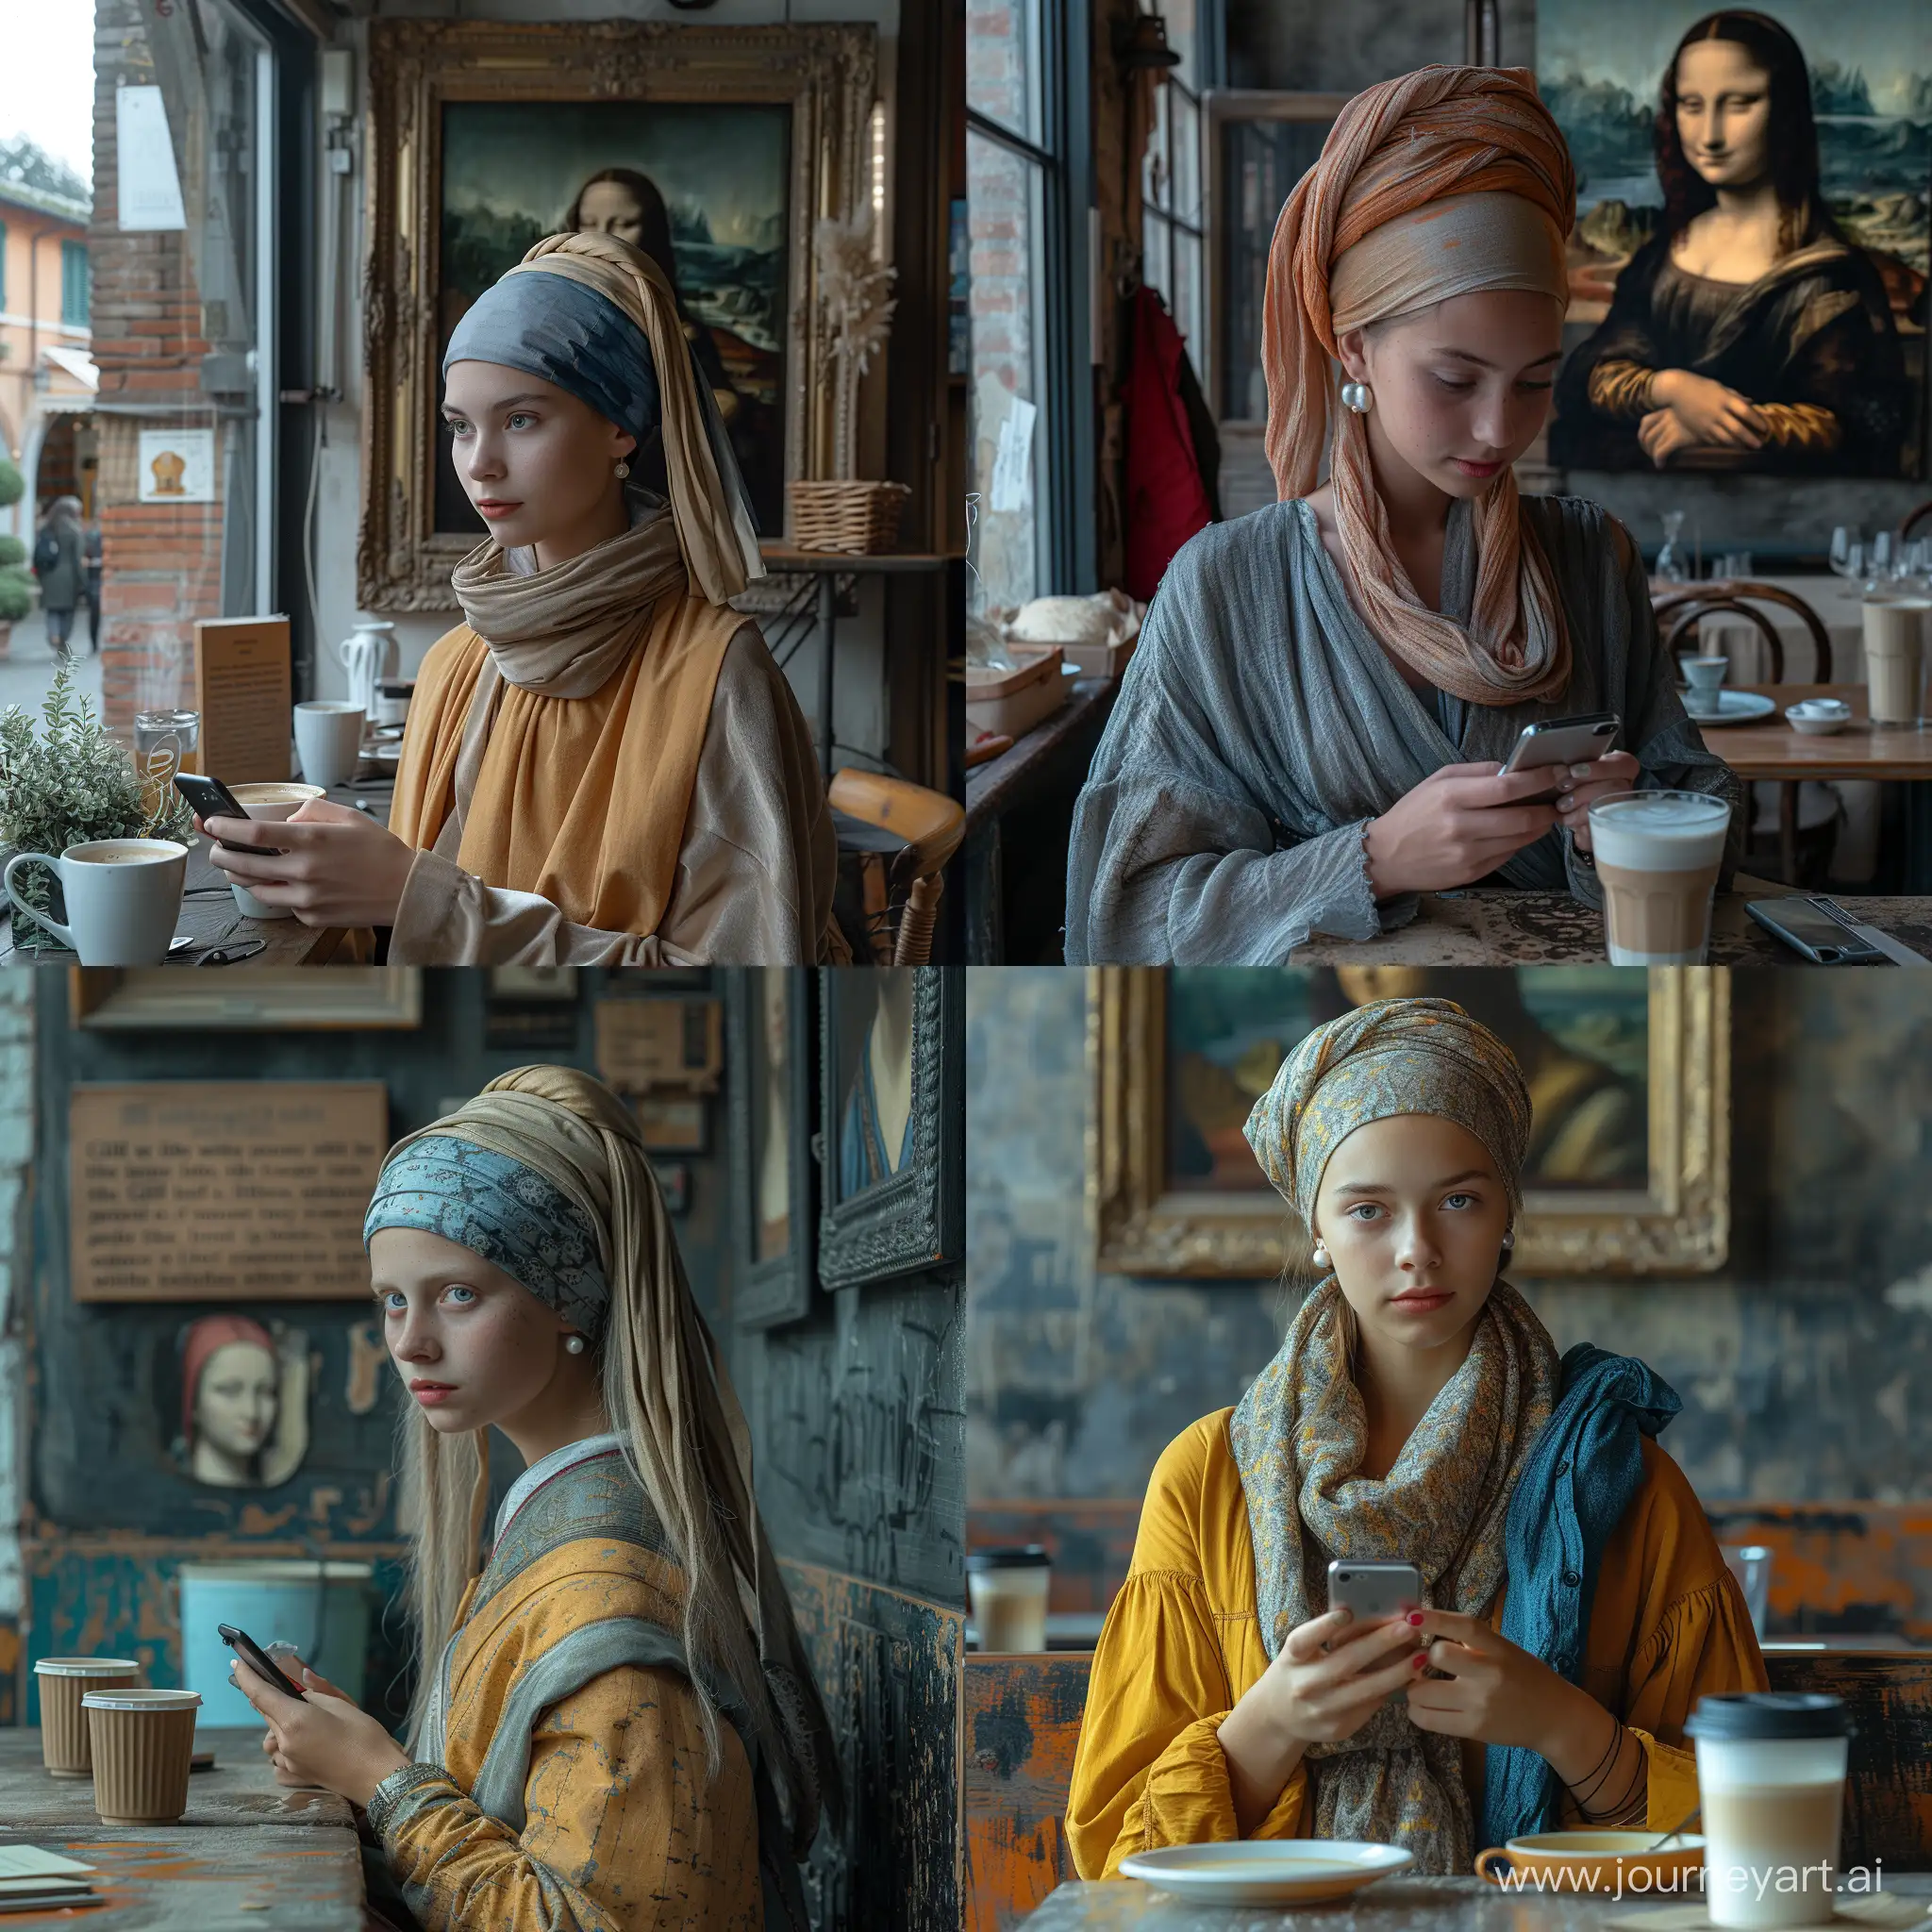 "Girl with a pearl earring" and the mona lisa modern digital photograph, in italy, sitting at an outdoor cafe looking at her cellphone, latte sitting on the table --stylize 750 --v 6